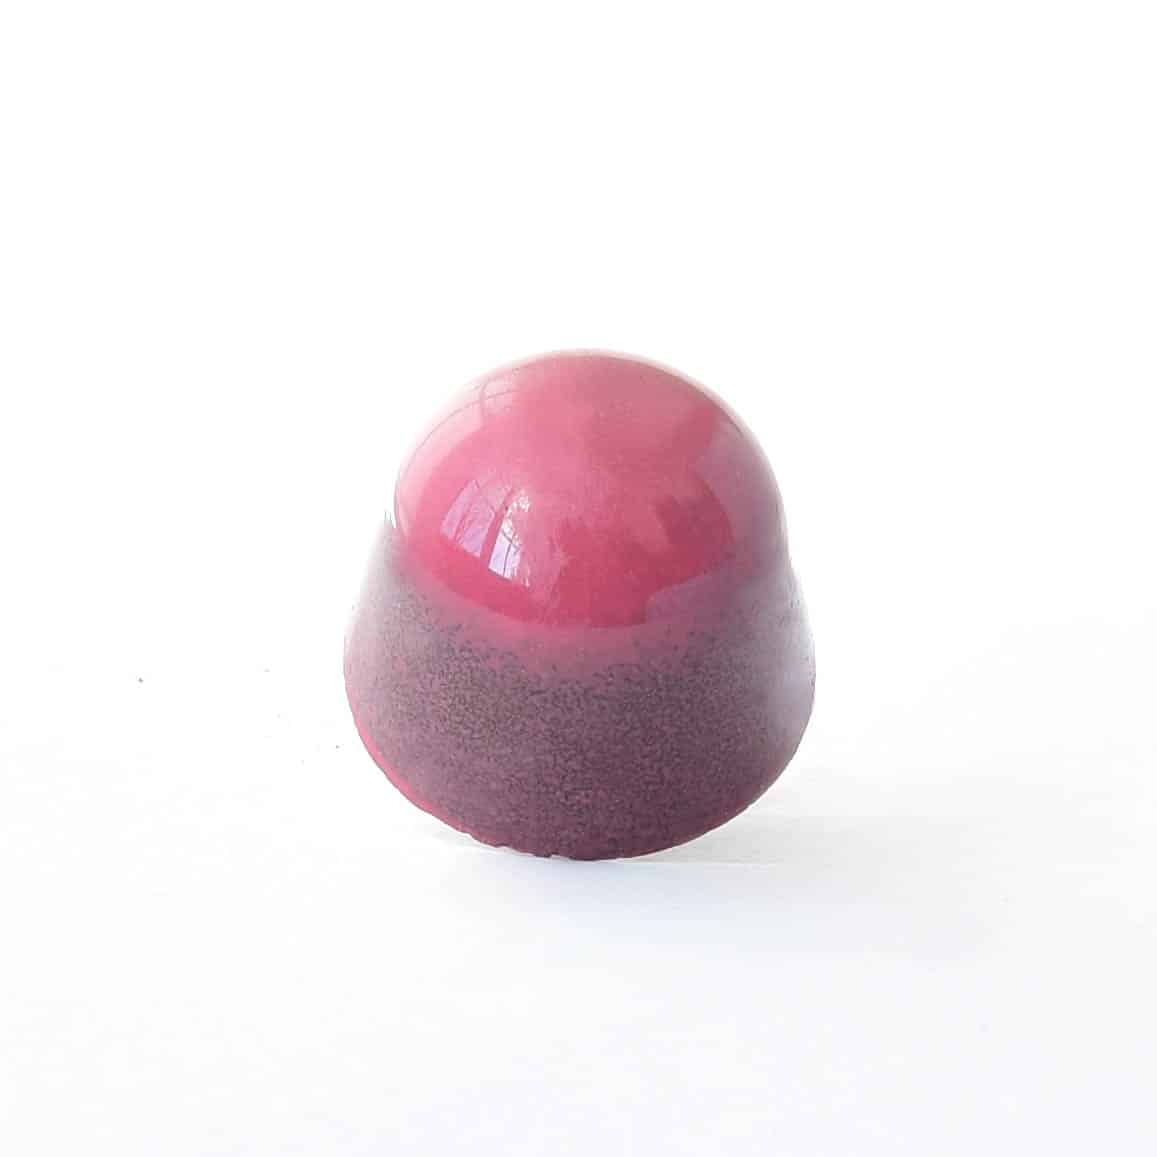 Berry-colored gourmet chocolate truffle that tastes like strawberry cheesecake